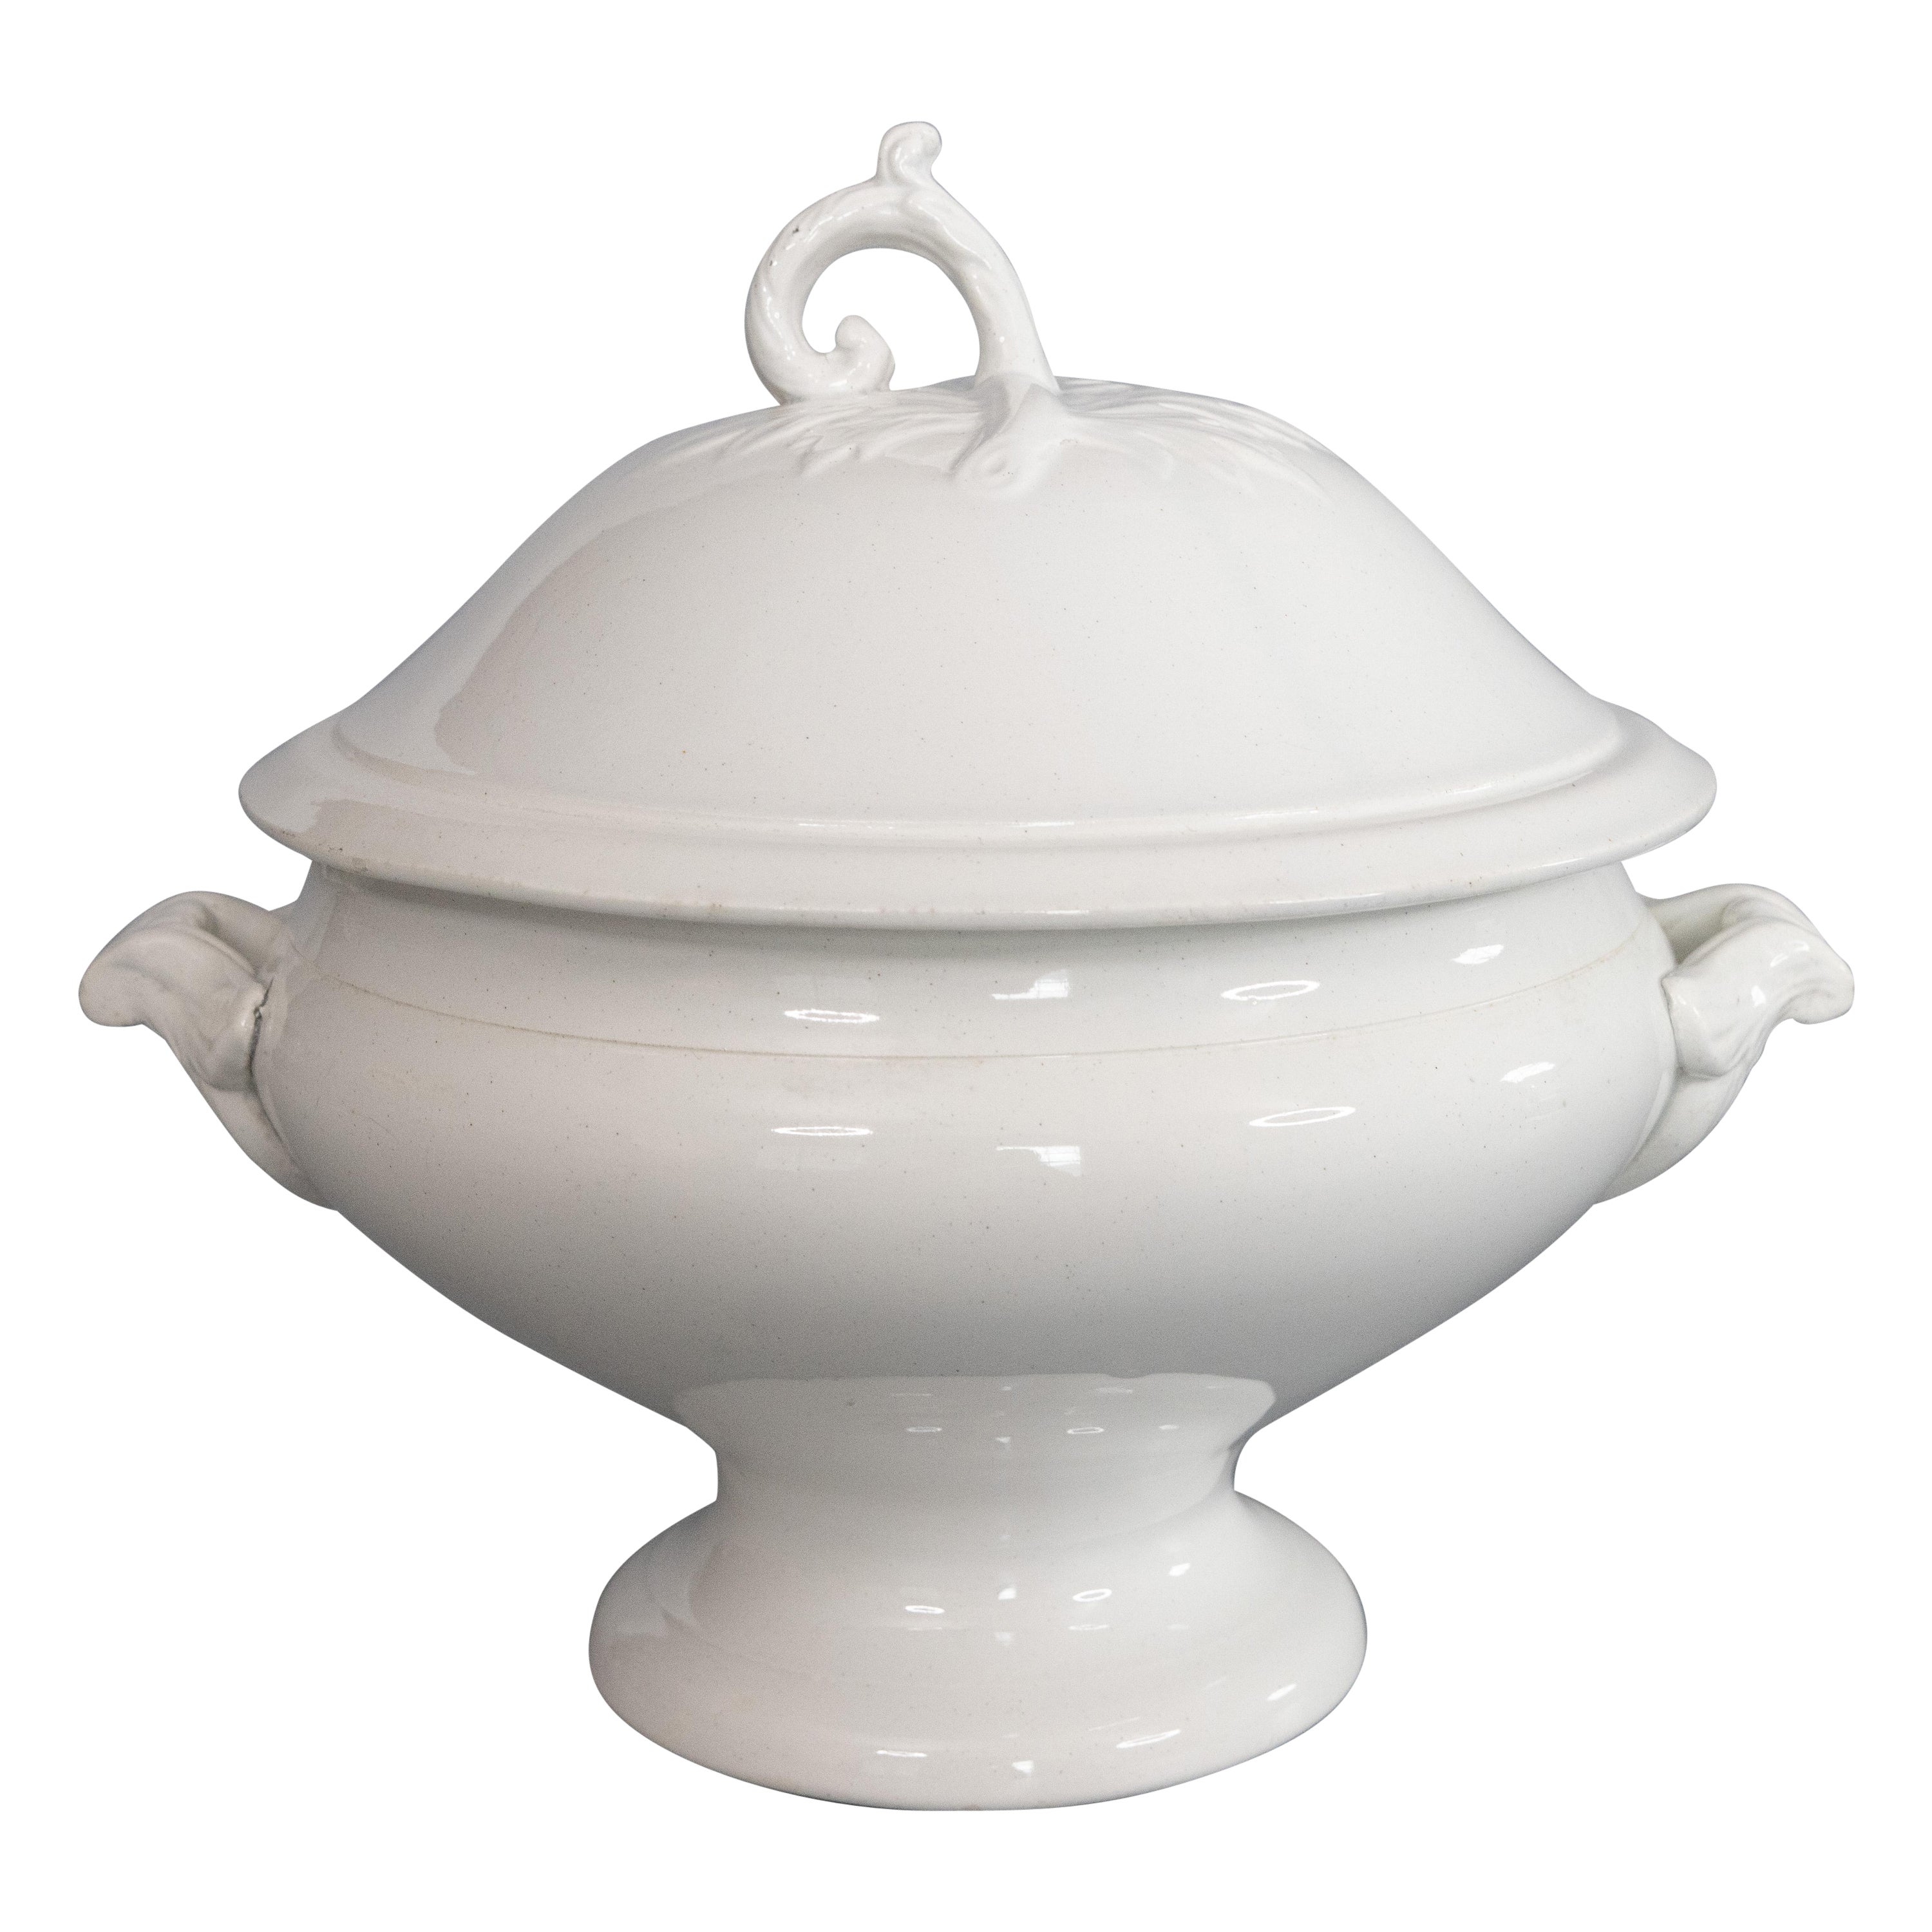 Antique French White Ironstone Soup Tureen Soupiere